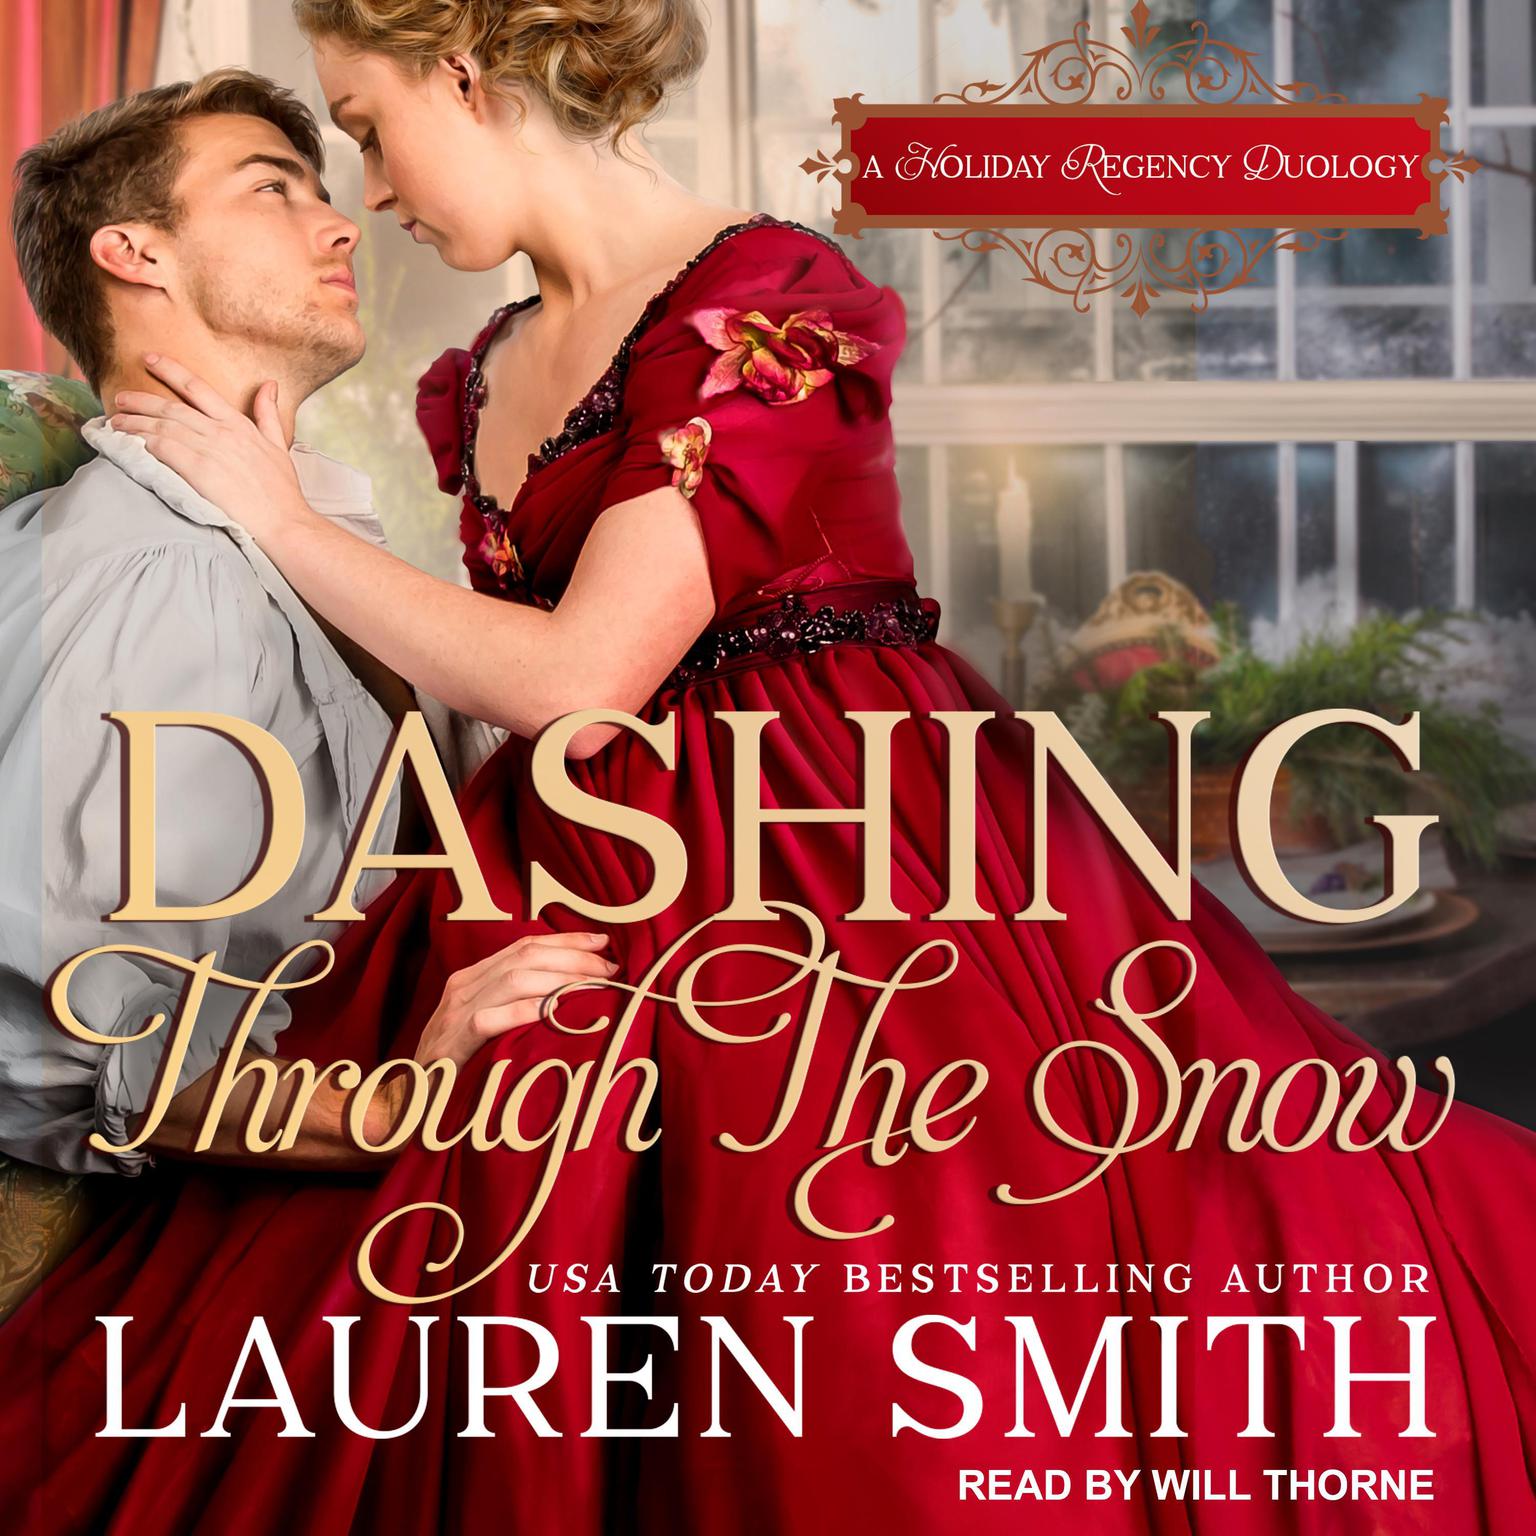 Dashing Through the Snow: A Holiday Regency Duology Audiobook, by Lauren Smith